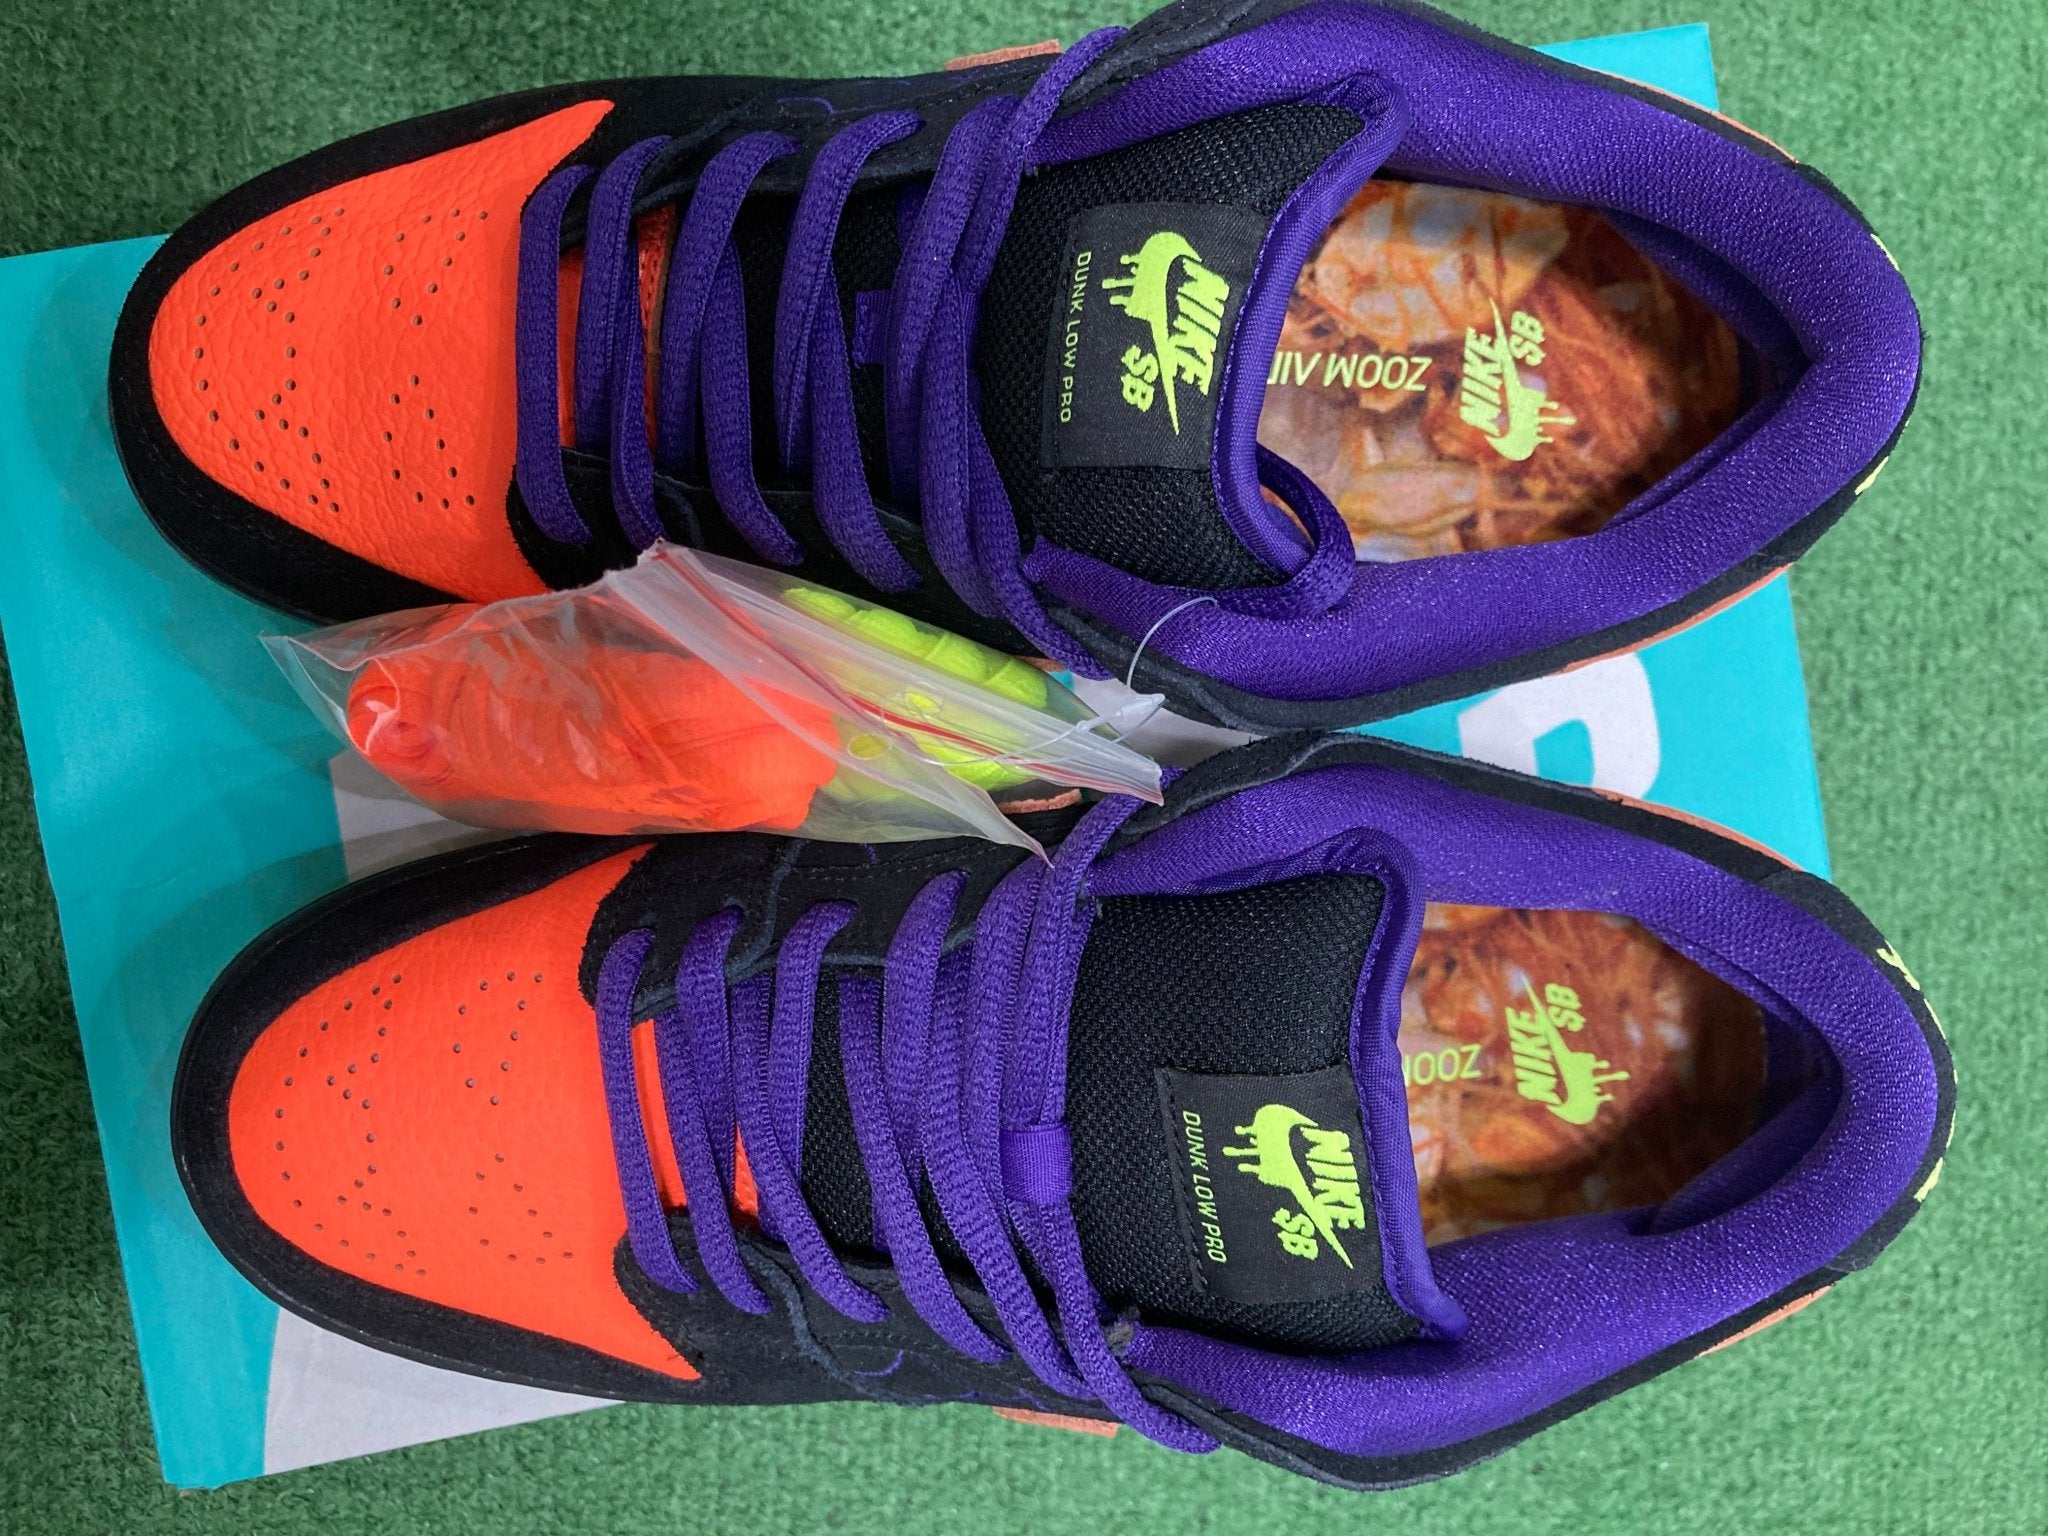 Nike SB Dunk Low Night Of Mischief Halloween Size 11 for Sale in